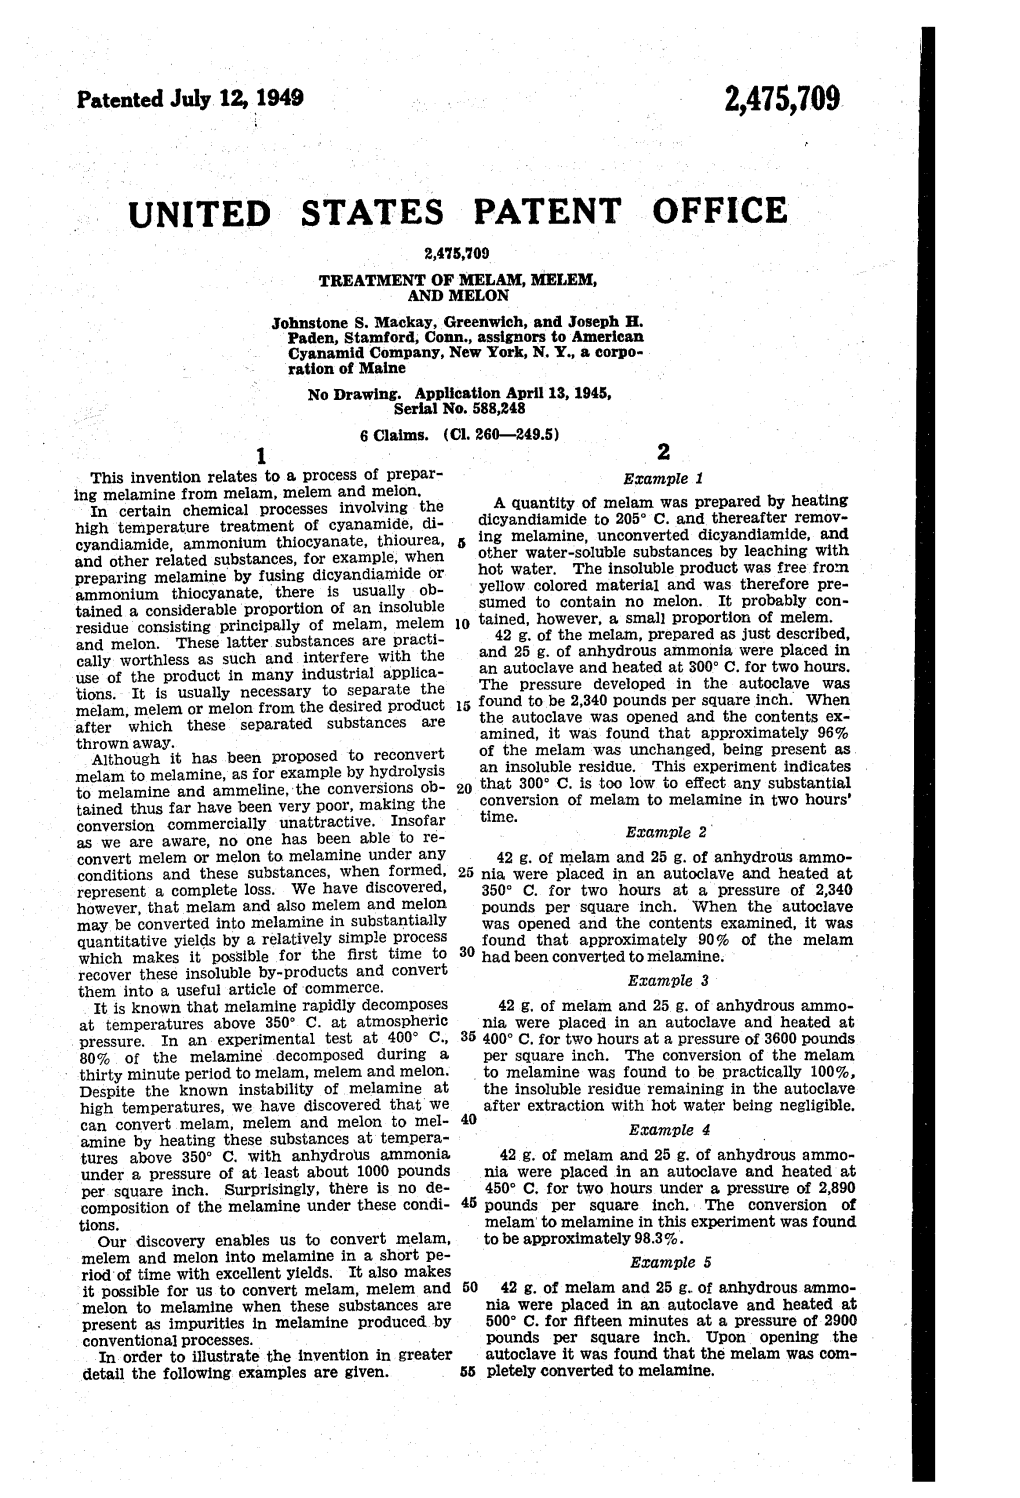 UNITED STATES PATENT of FICE TREATMENT of MELAM, MELEM, and MELON Johnstone S